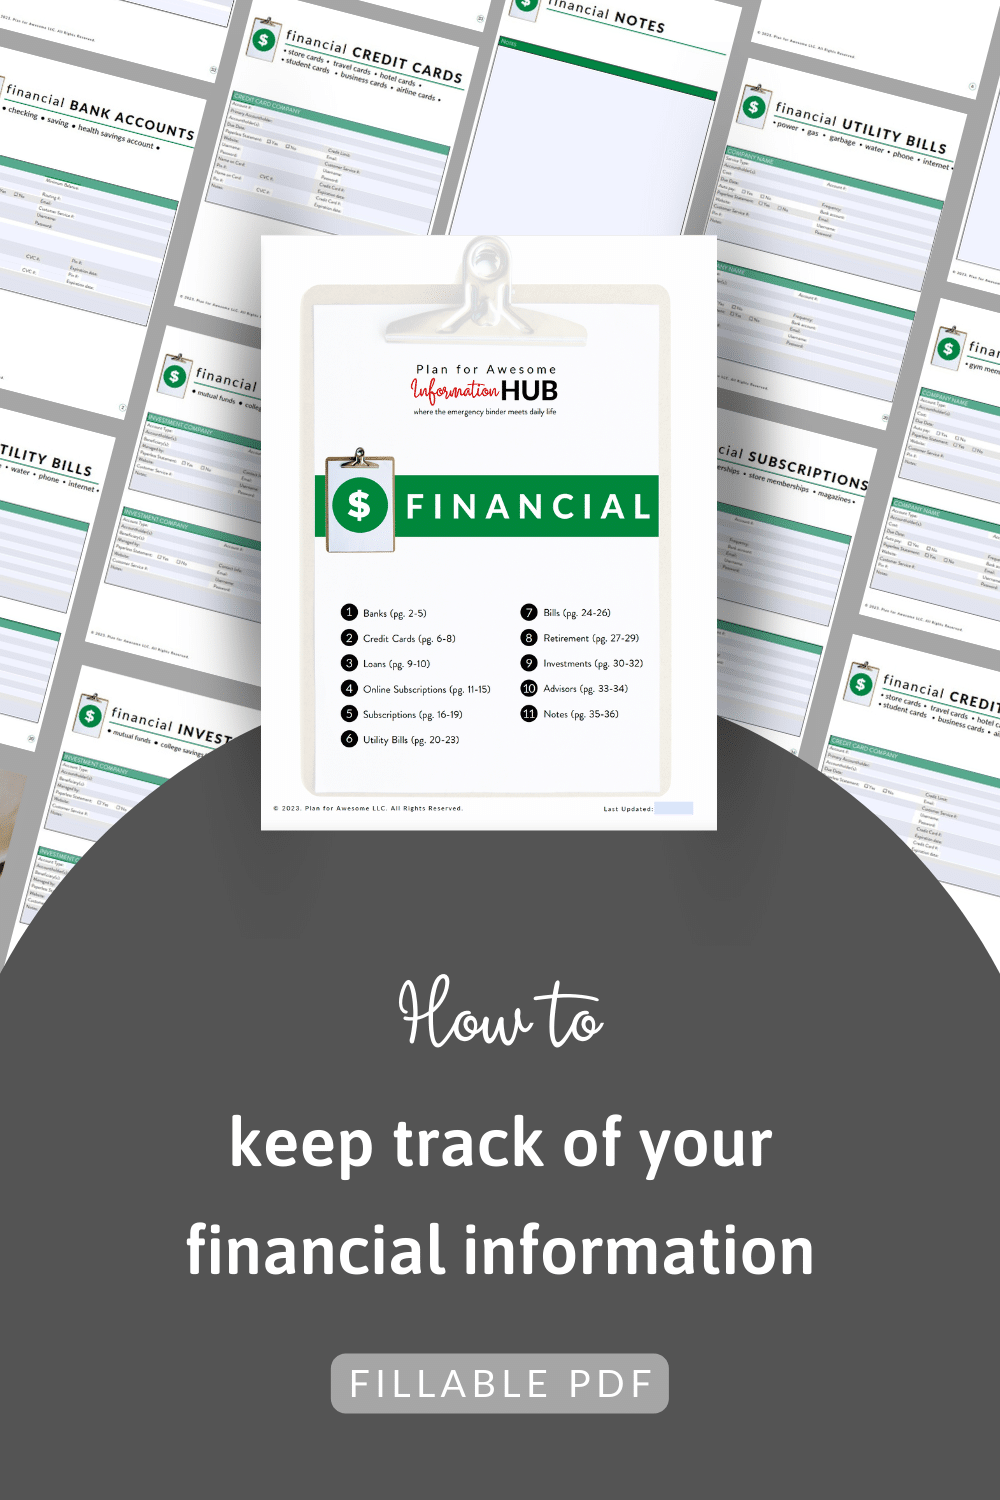 1 Simple Way to Organize Your Financial Information